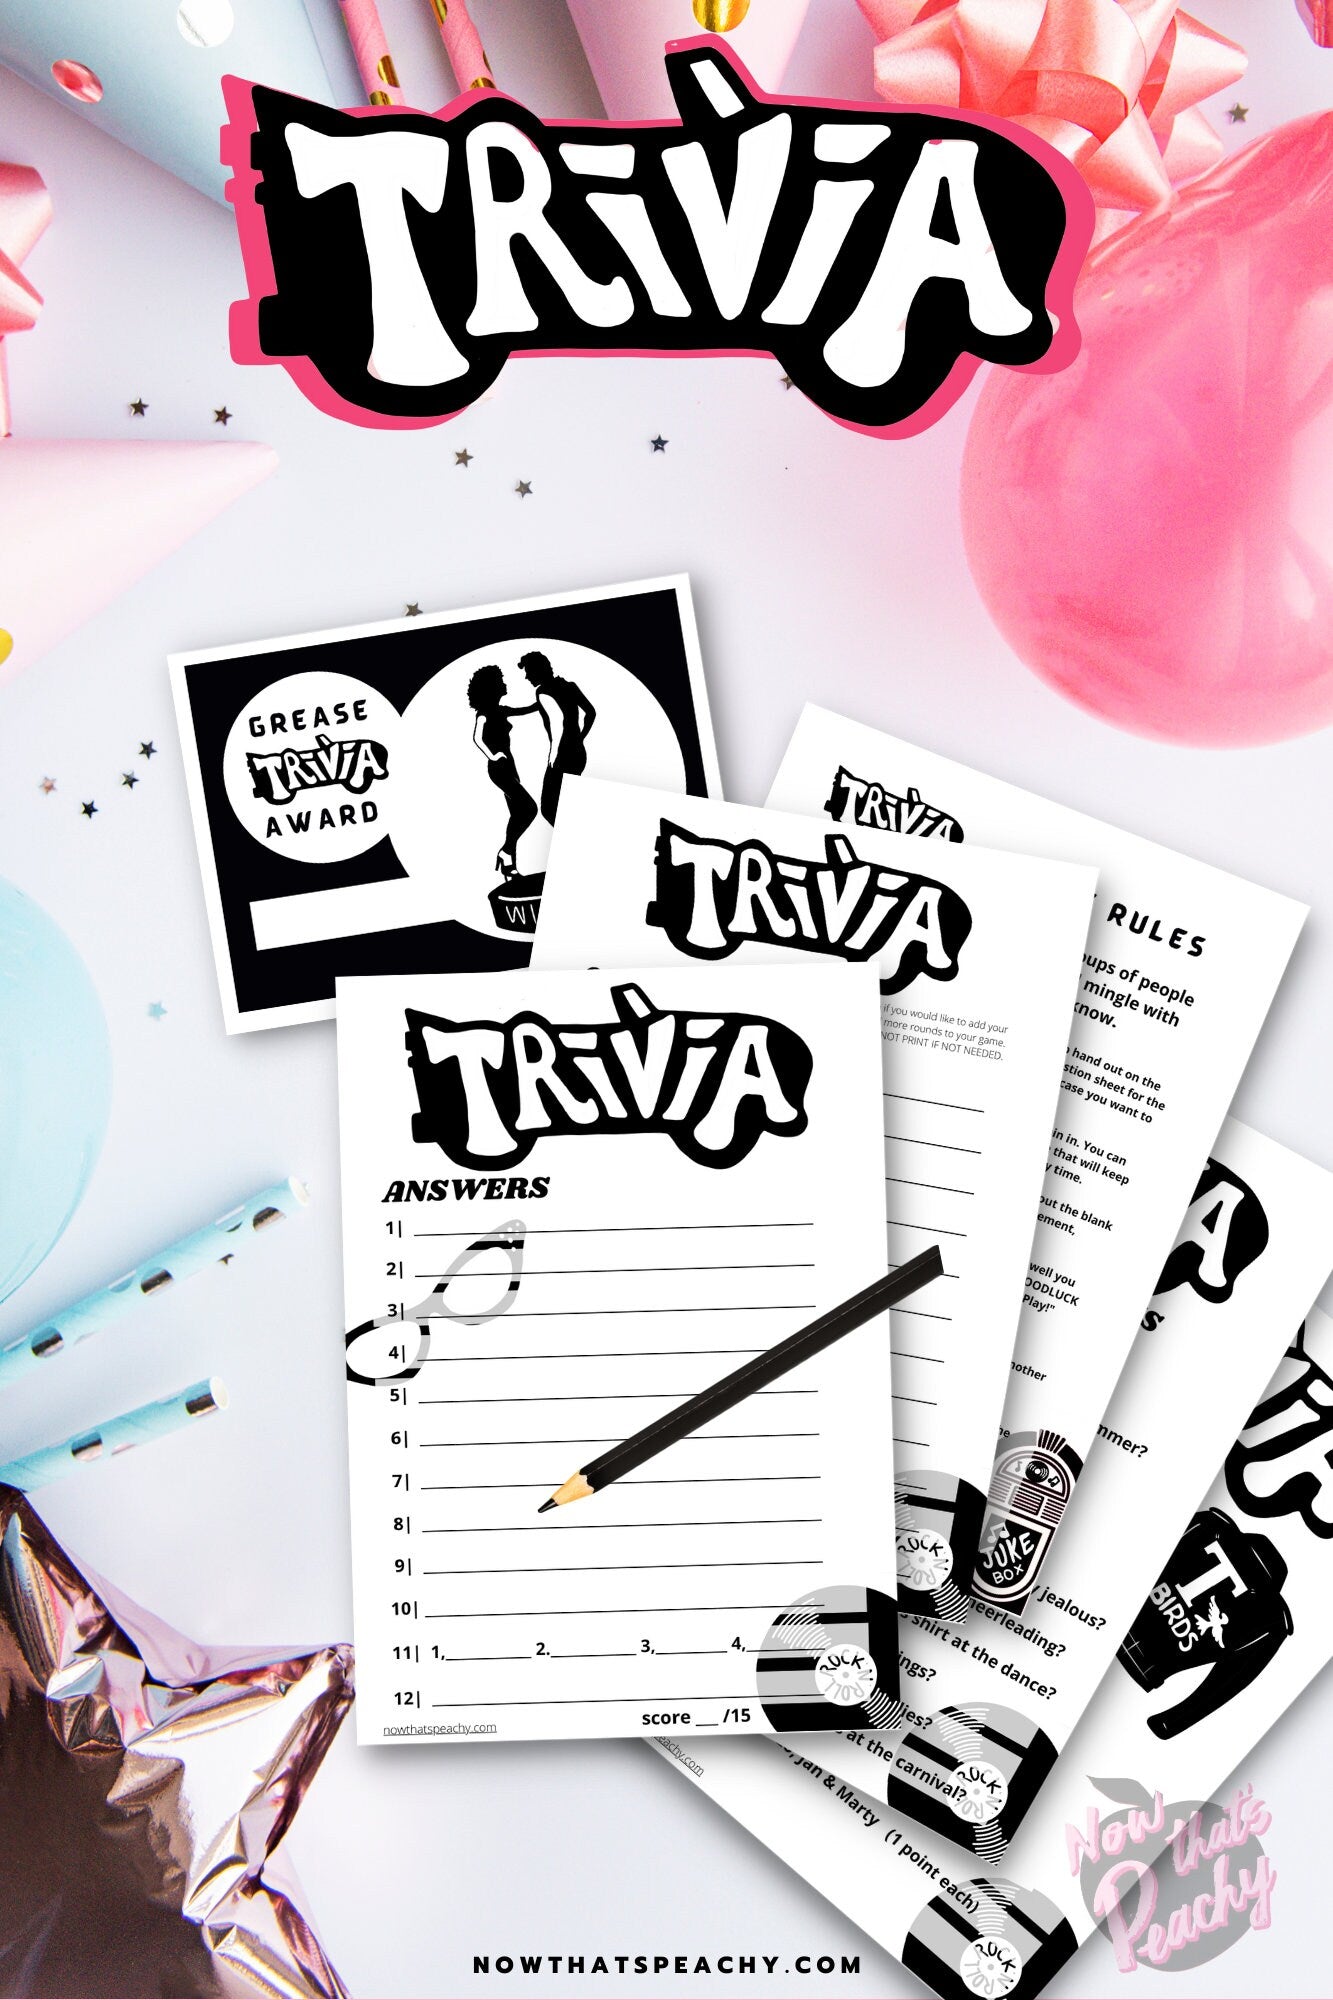 Grease Movie Trivia quiz question game party package 1950s fifties 50's printable template digital instant download edit Danny Sandy T-birds Pink Ladies  invite soda hop jukebox rockabilly rock'n'roll musical movie design black white modern color fun themed bachelorette birthday charity fundraiser event activity